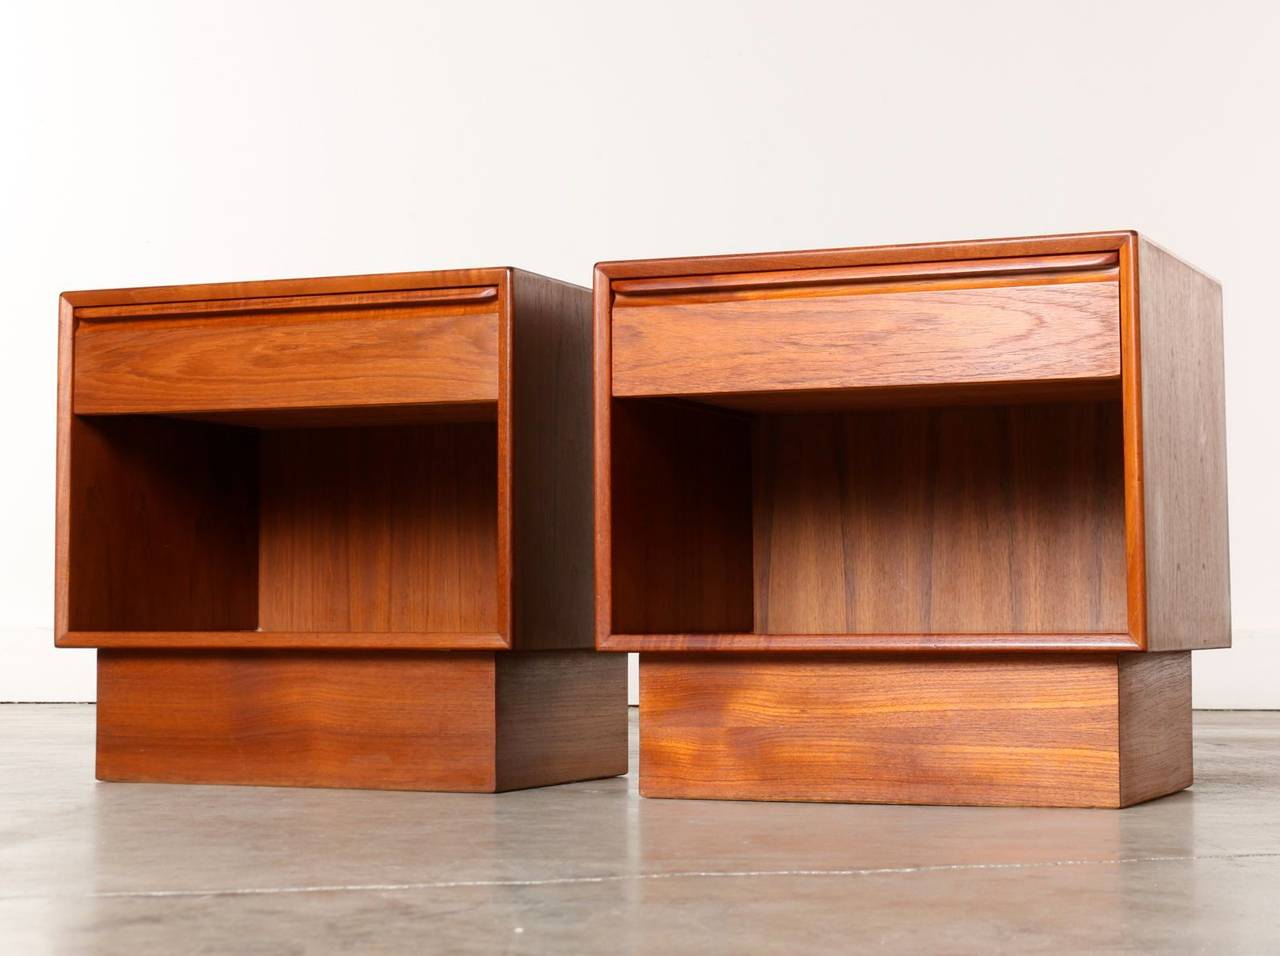 This pair of Mid-Century teak nightstands have wonderful clean lines, are extremely well made and are in very good condition. Sturdy construction, functional design with drawer and bottom shelf for storage and great looks make this set a bedside